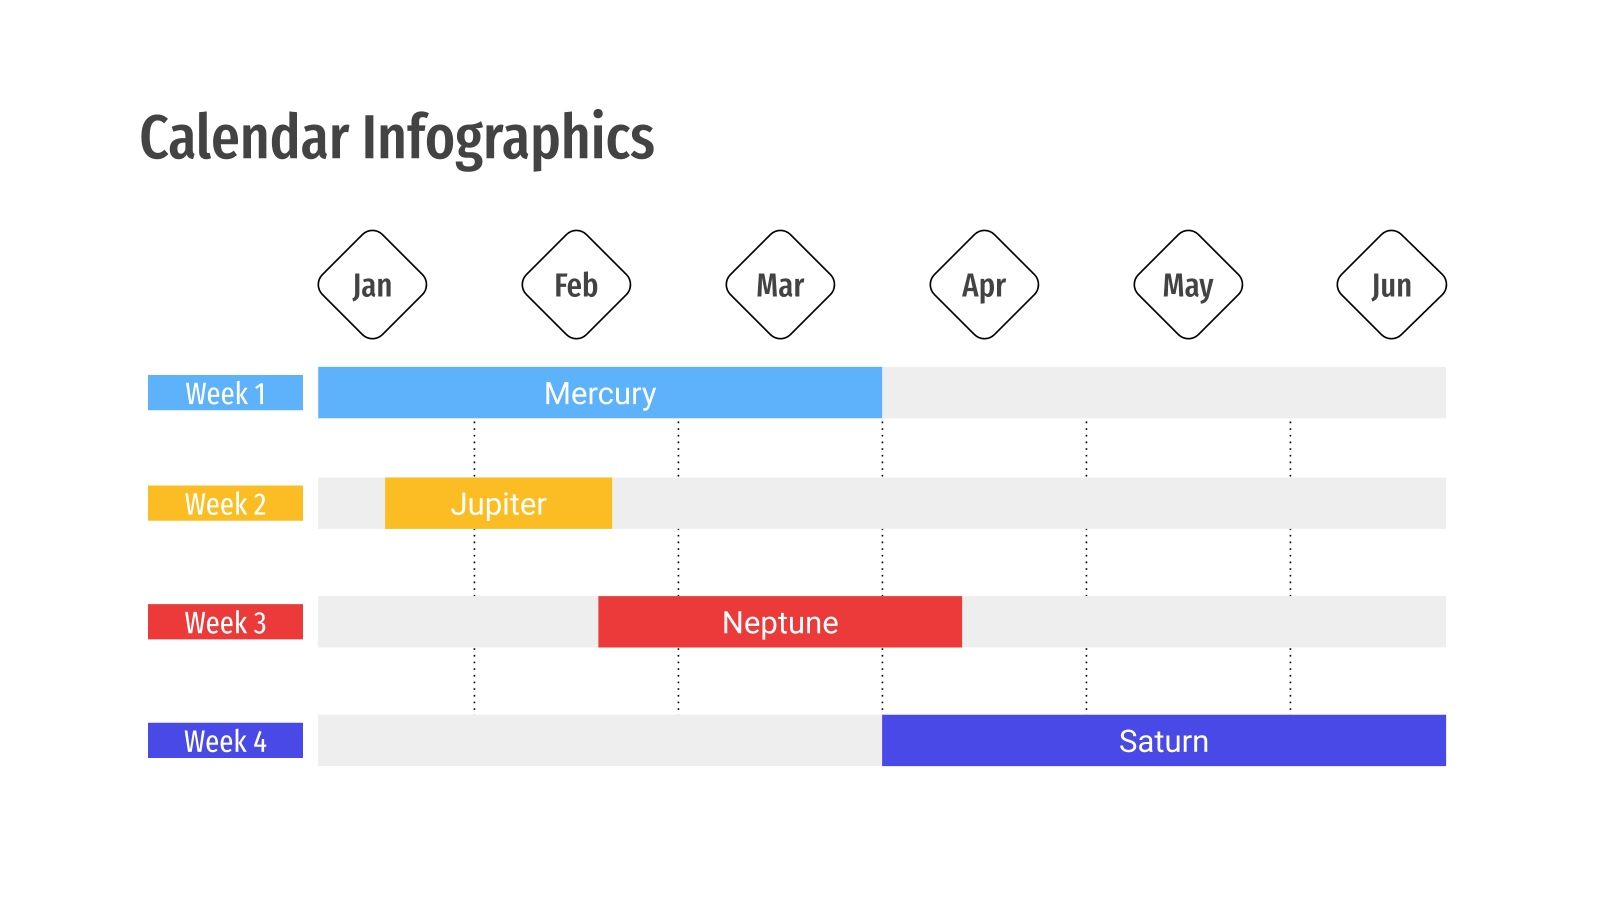 TOTAL calendar | Infographic layout, Infographic illustration, Infographic poster